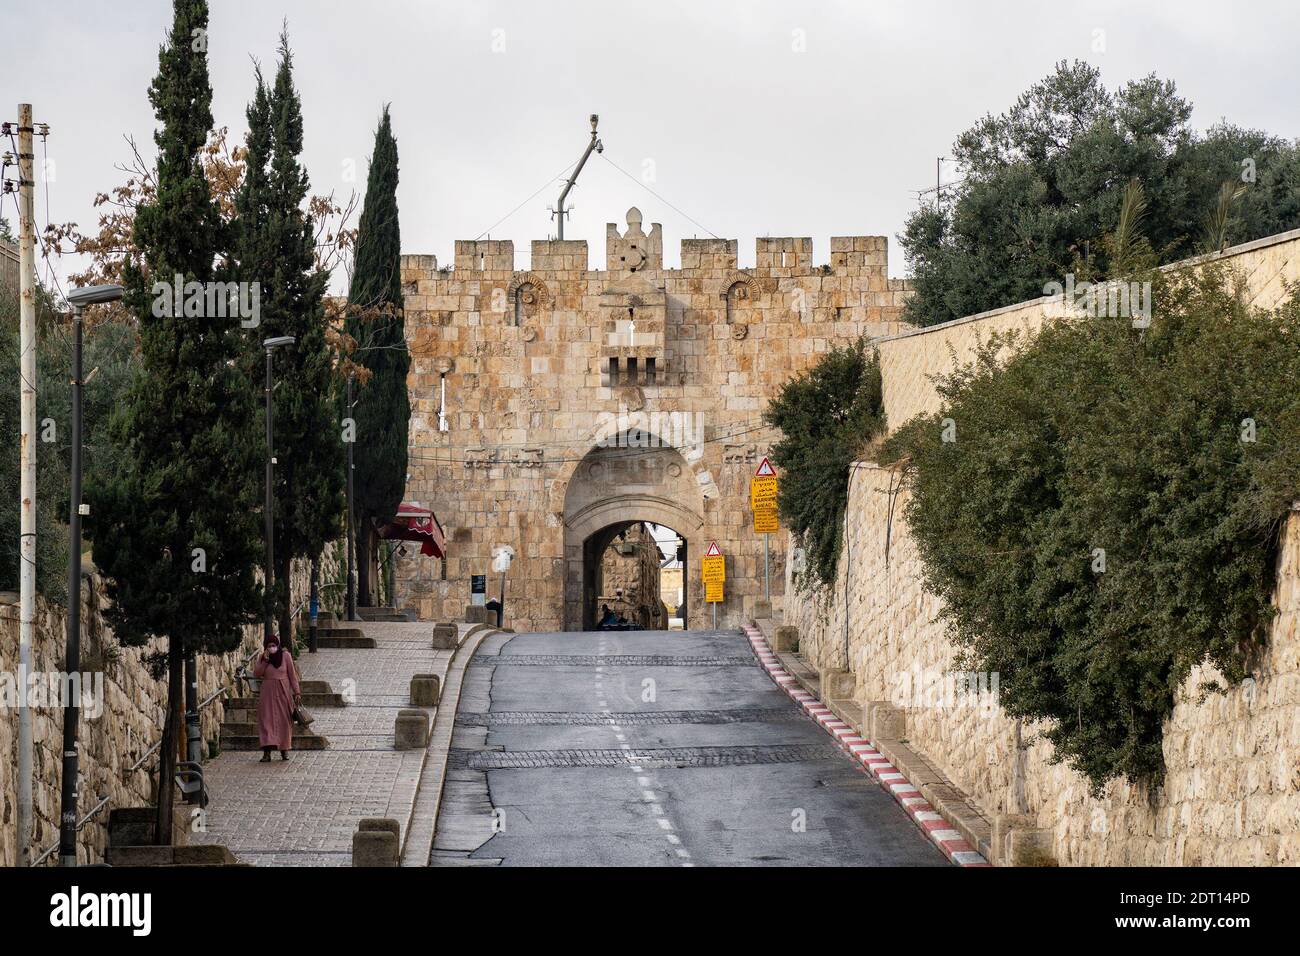 Jerusalem, Israel - December 17th, 2020: The 'Lions gate' in the walls of ancient Jerusalem, on an overcast day. Stock Photo